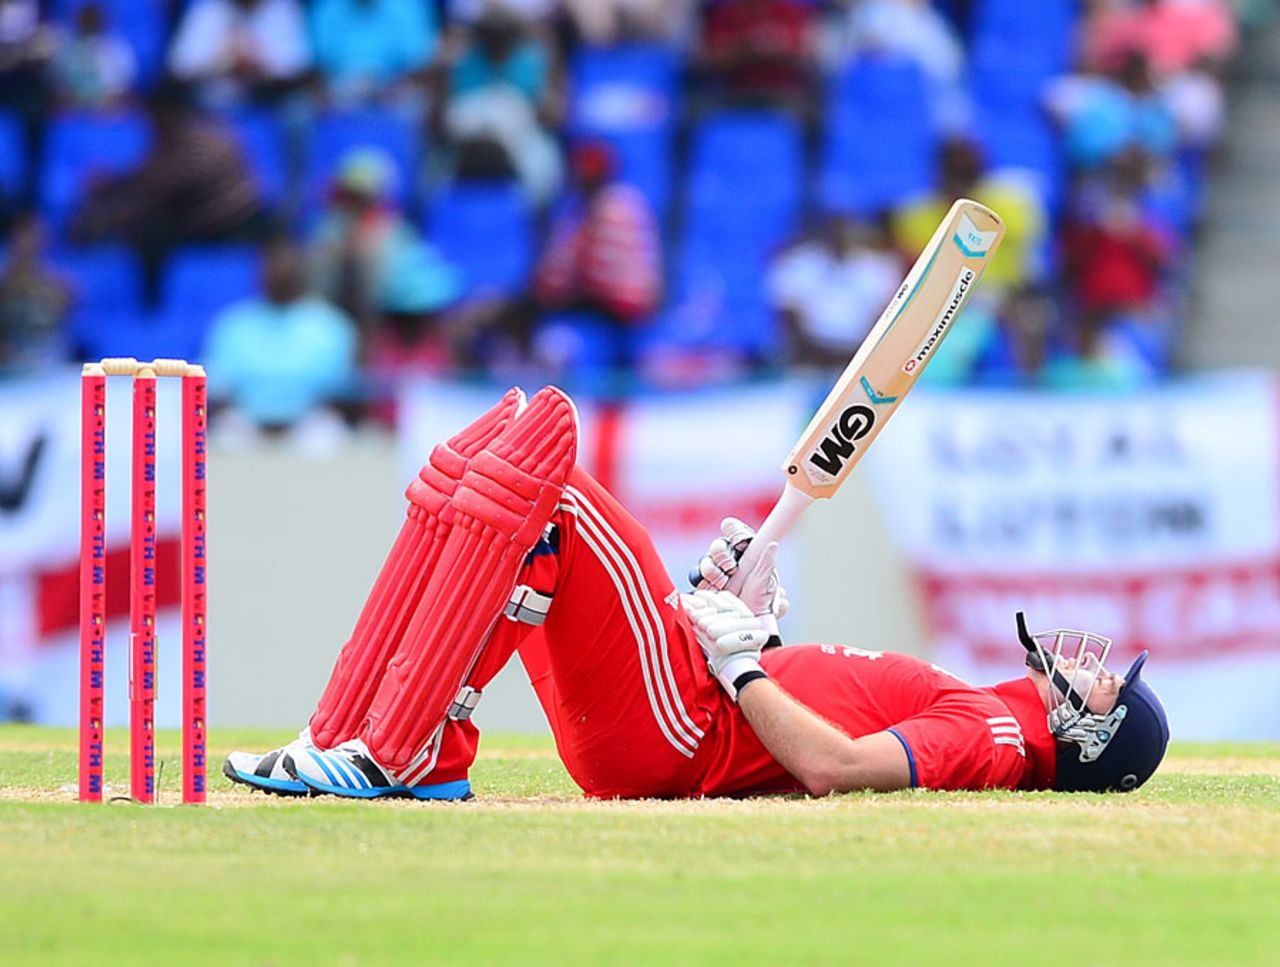 Michael Lumb was flat out after a painful blow, West Indies v England, 1st ODI, North Sound, February 28, 2014